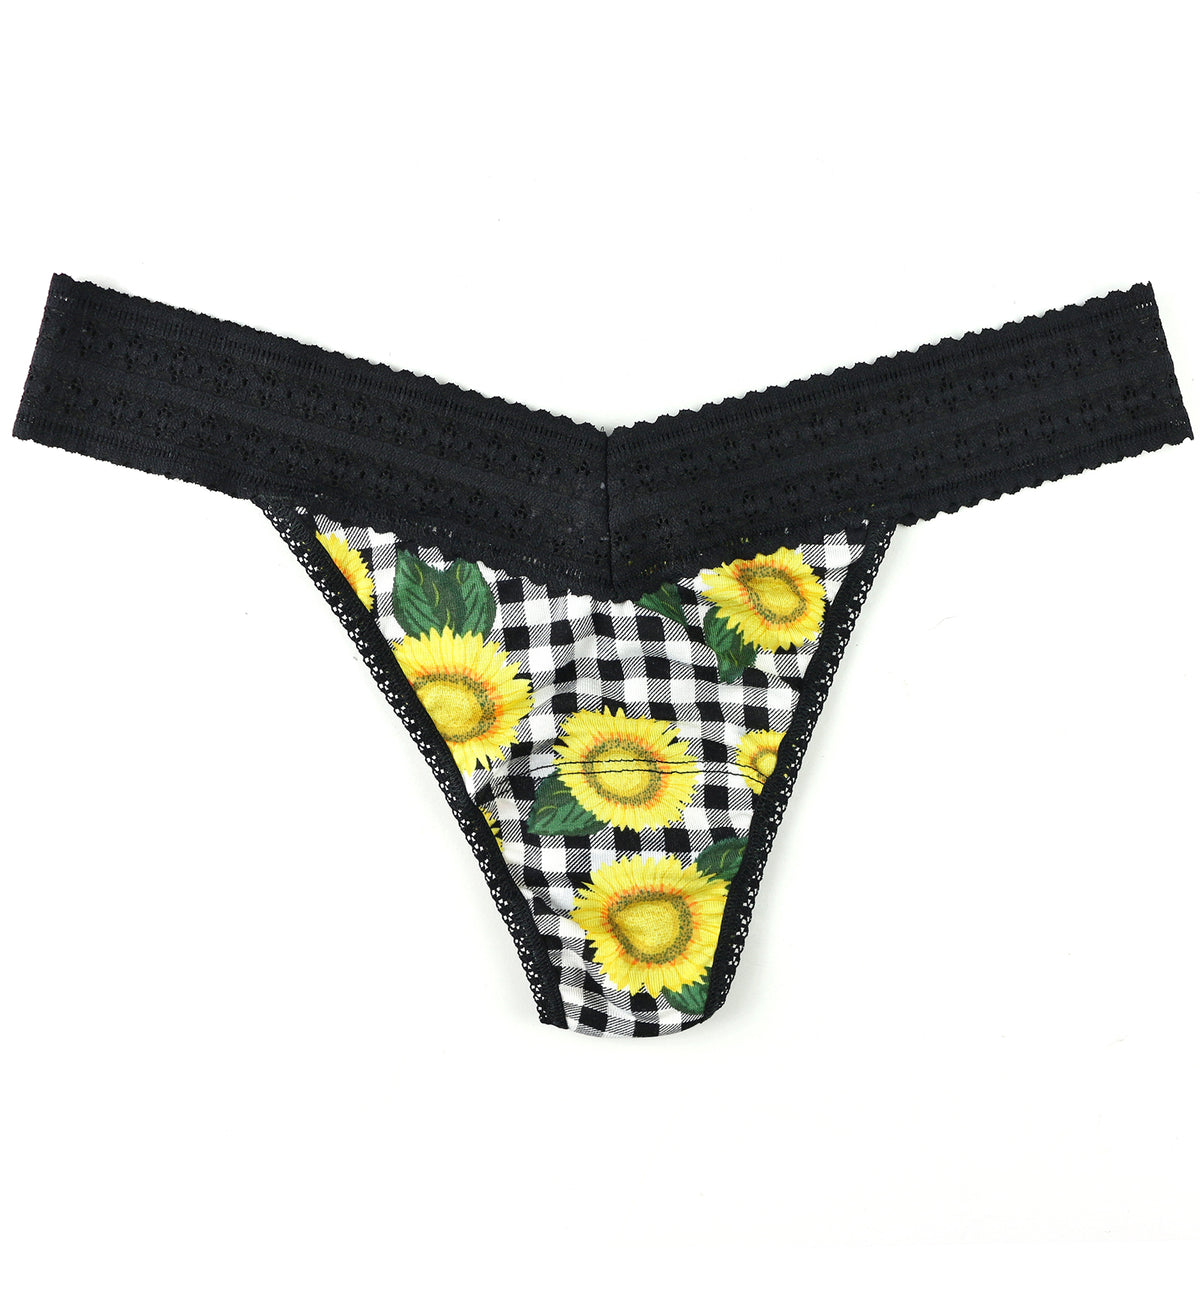 Hanky Panky Printed DreamEase Original Rise Thong (PR681104),Fields of Gold - Fields of Gold,One Size